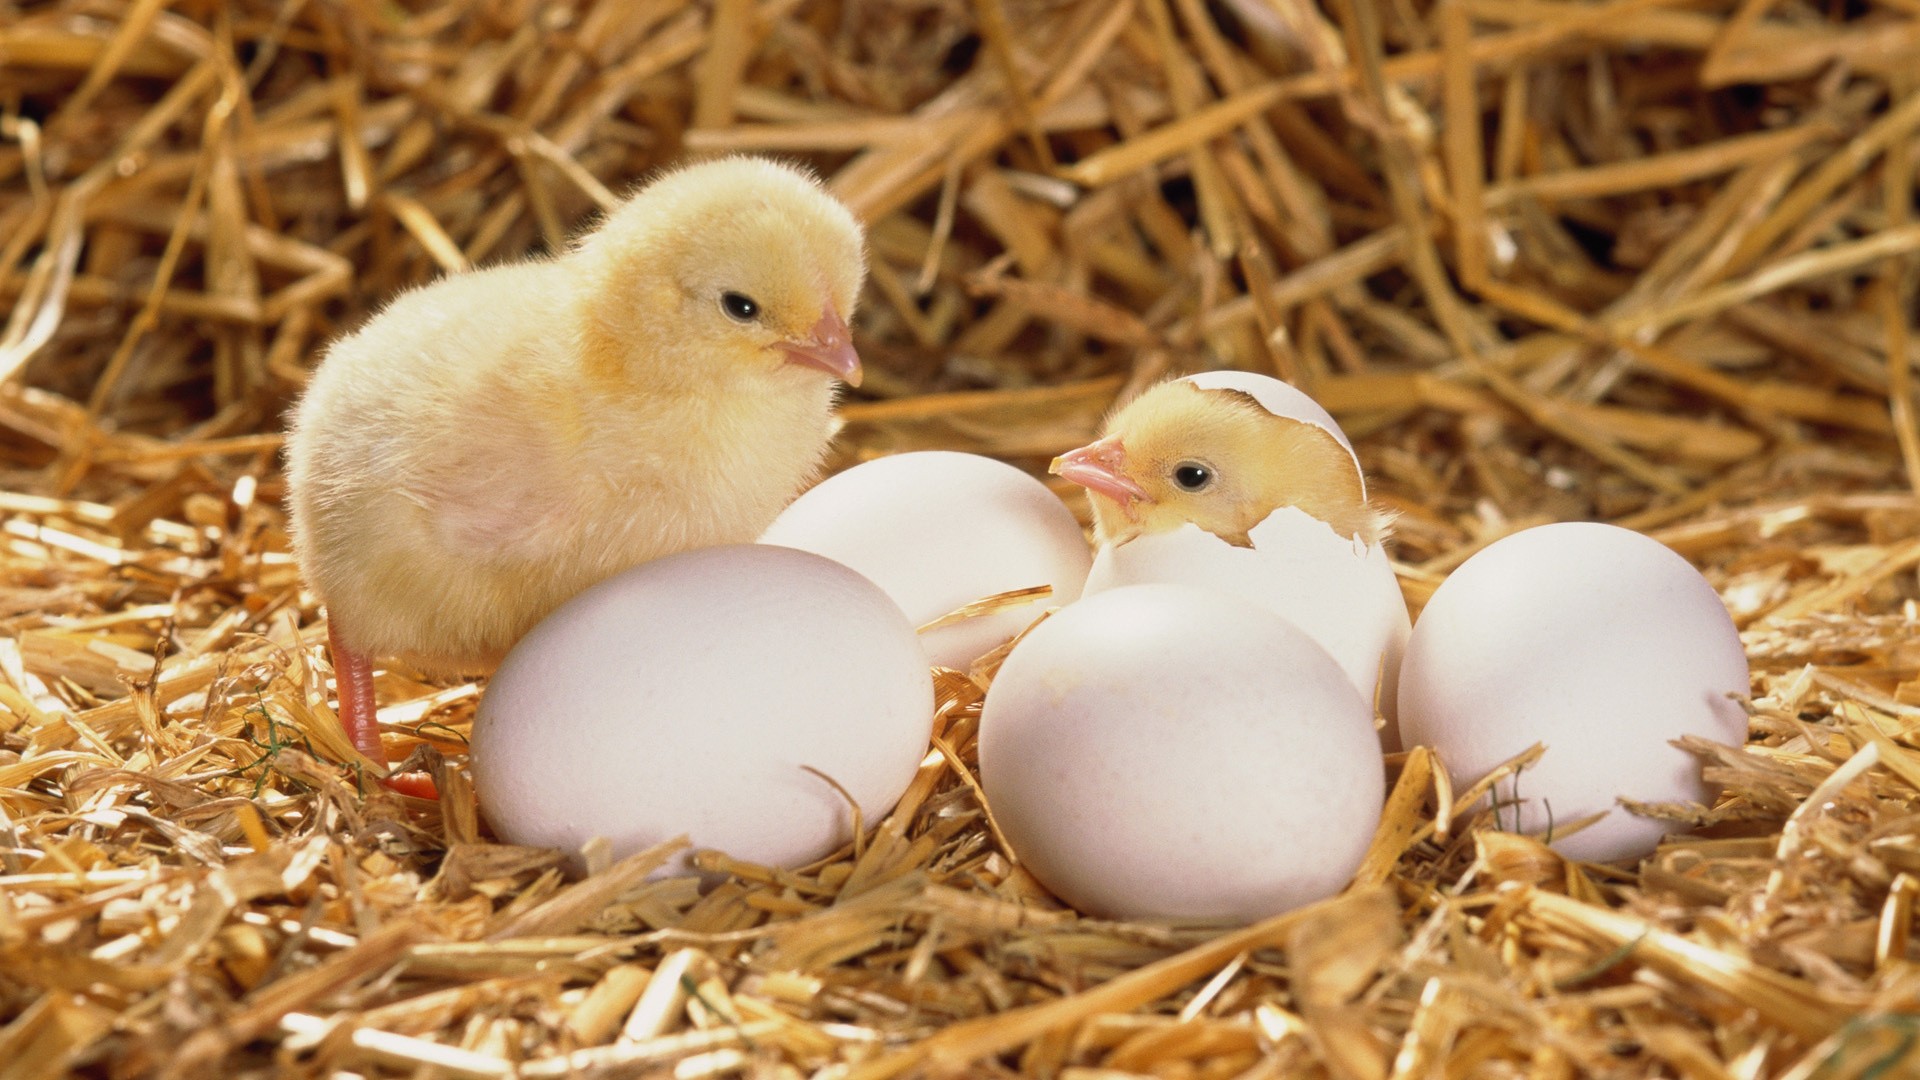 chicks-hatching-eggs-hay-fowl-chick-egg-animals-1080x1920 - Church of The  Rock